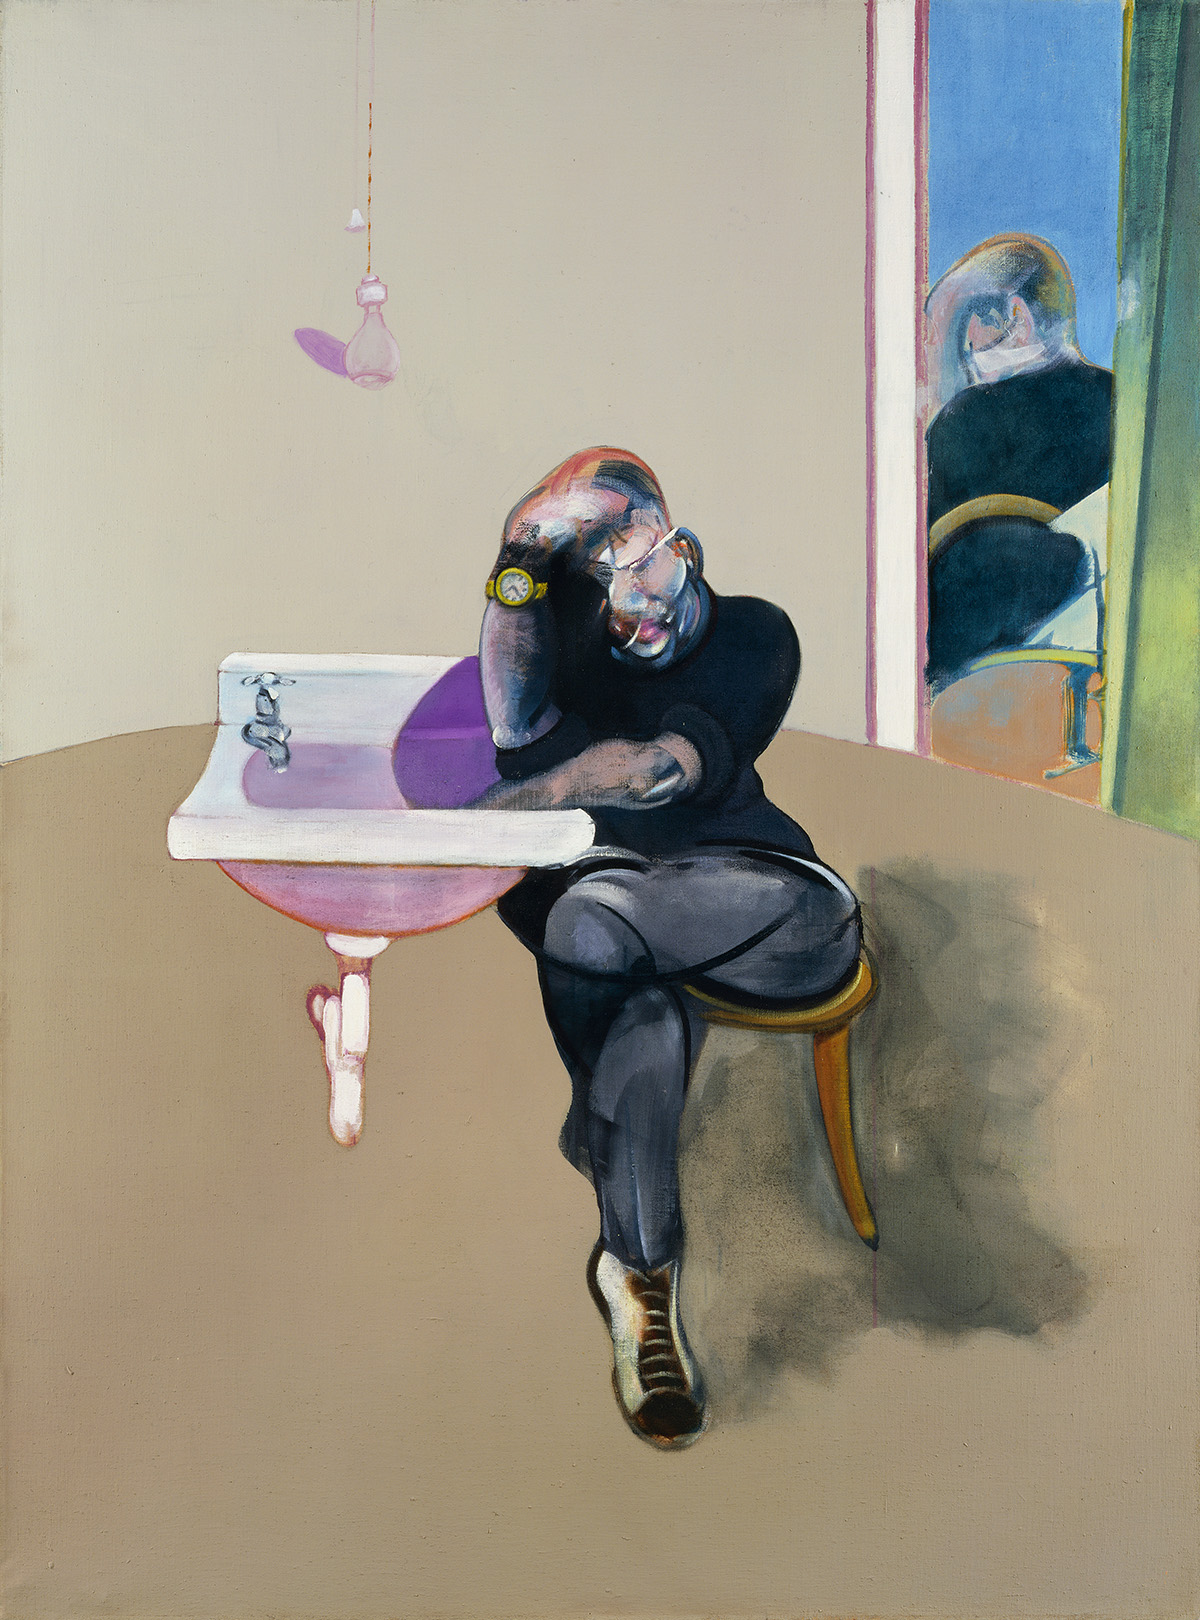 Self-Portrait, 1973. Oil on canvas. CR no. 73-05. © The Estate of Francis Bacon / DACS London 2023. All rights reserved.